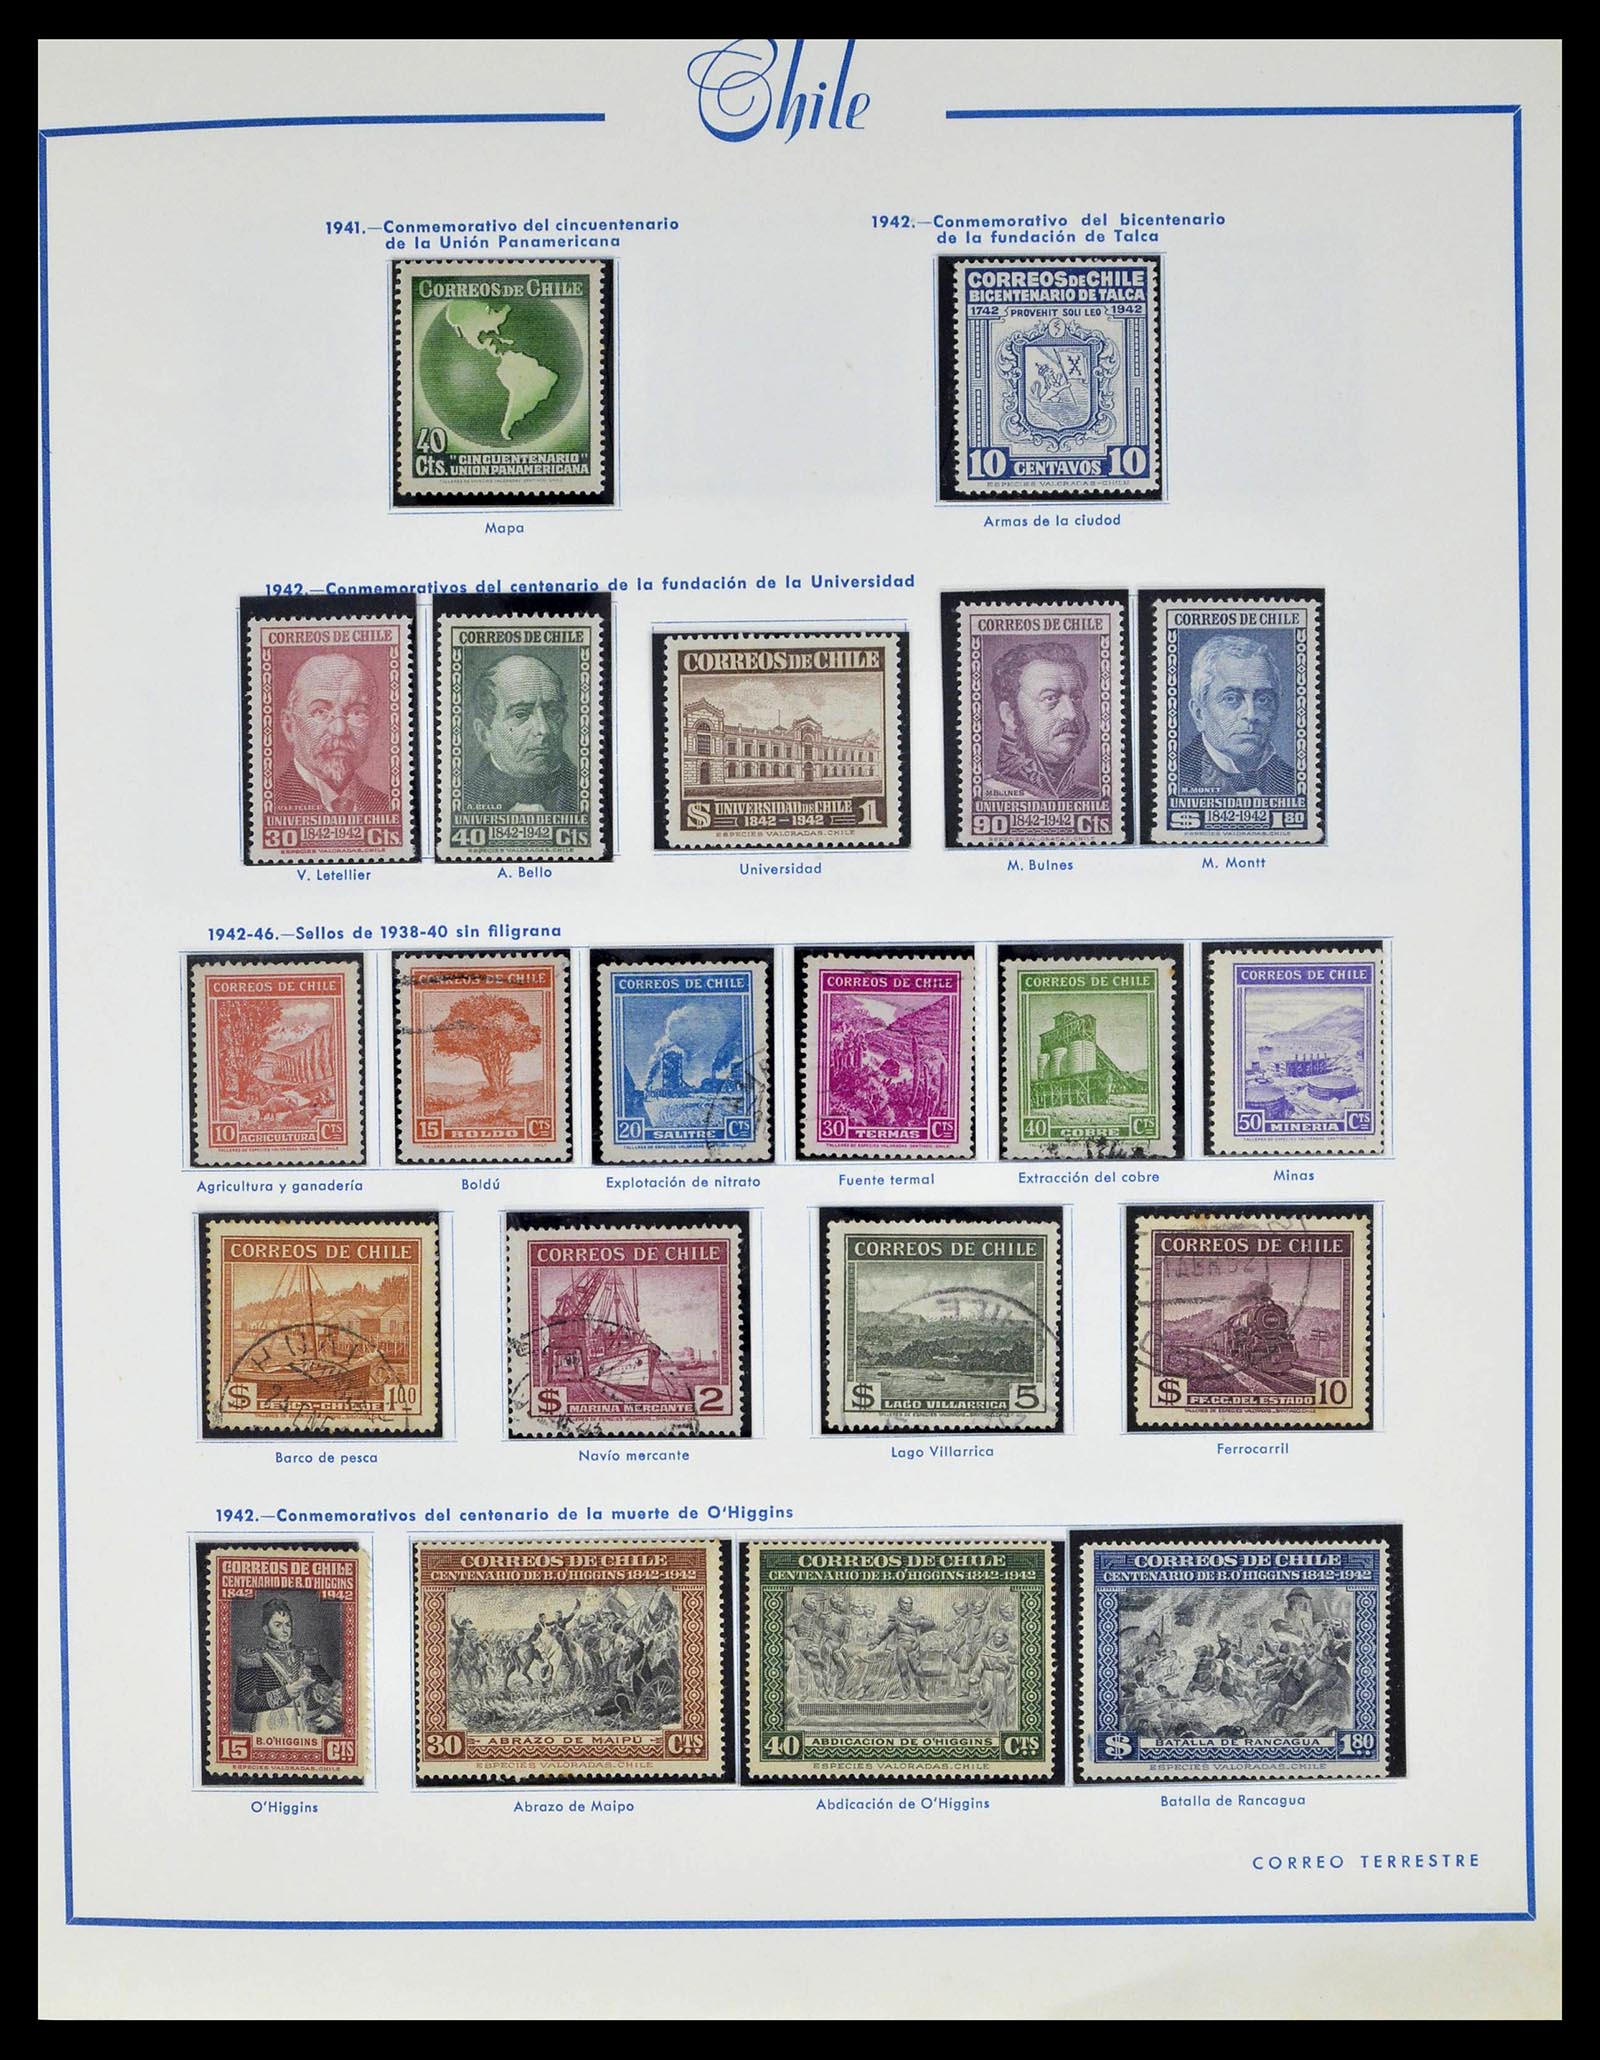 39213 0012 - Stamp collection 39213 Chile 1853-1970.